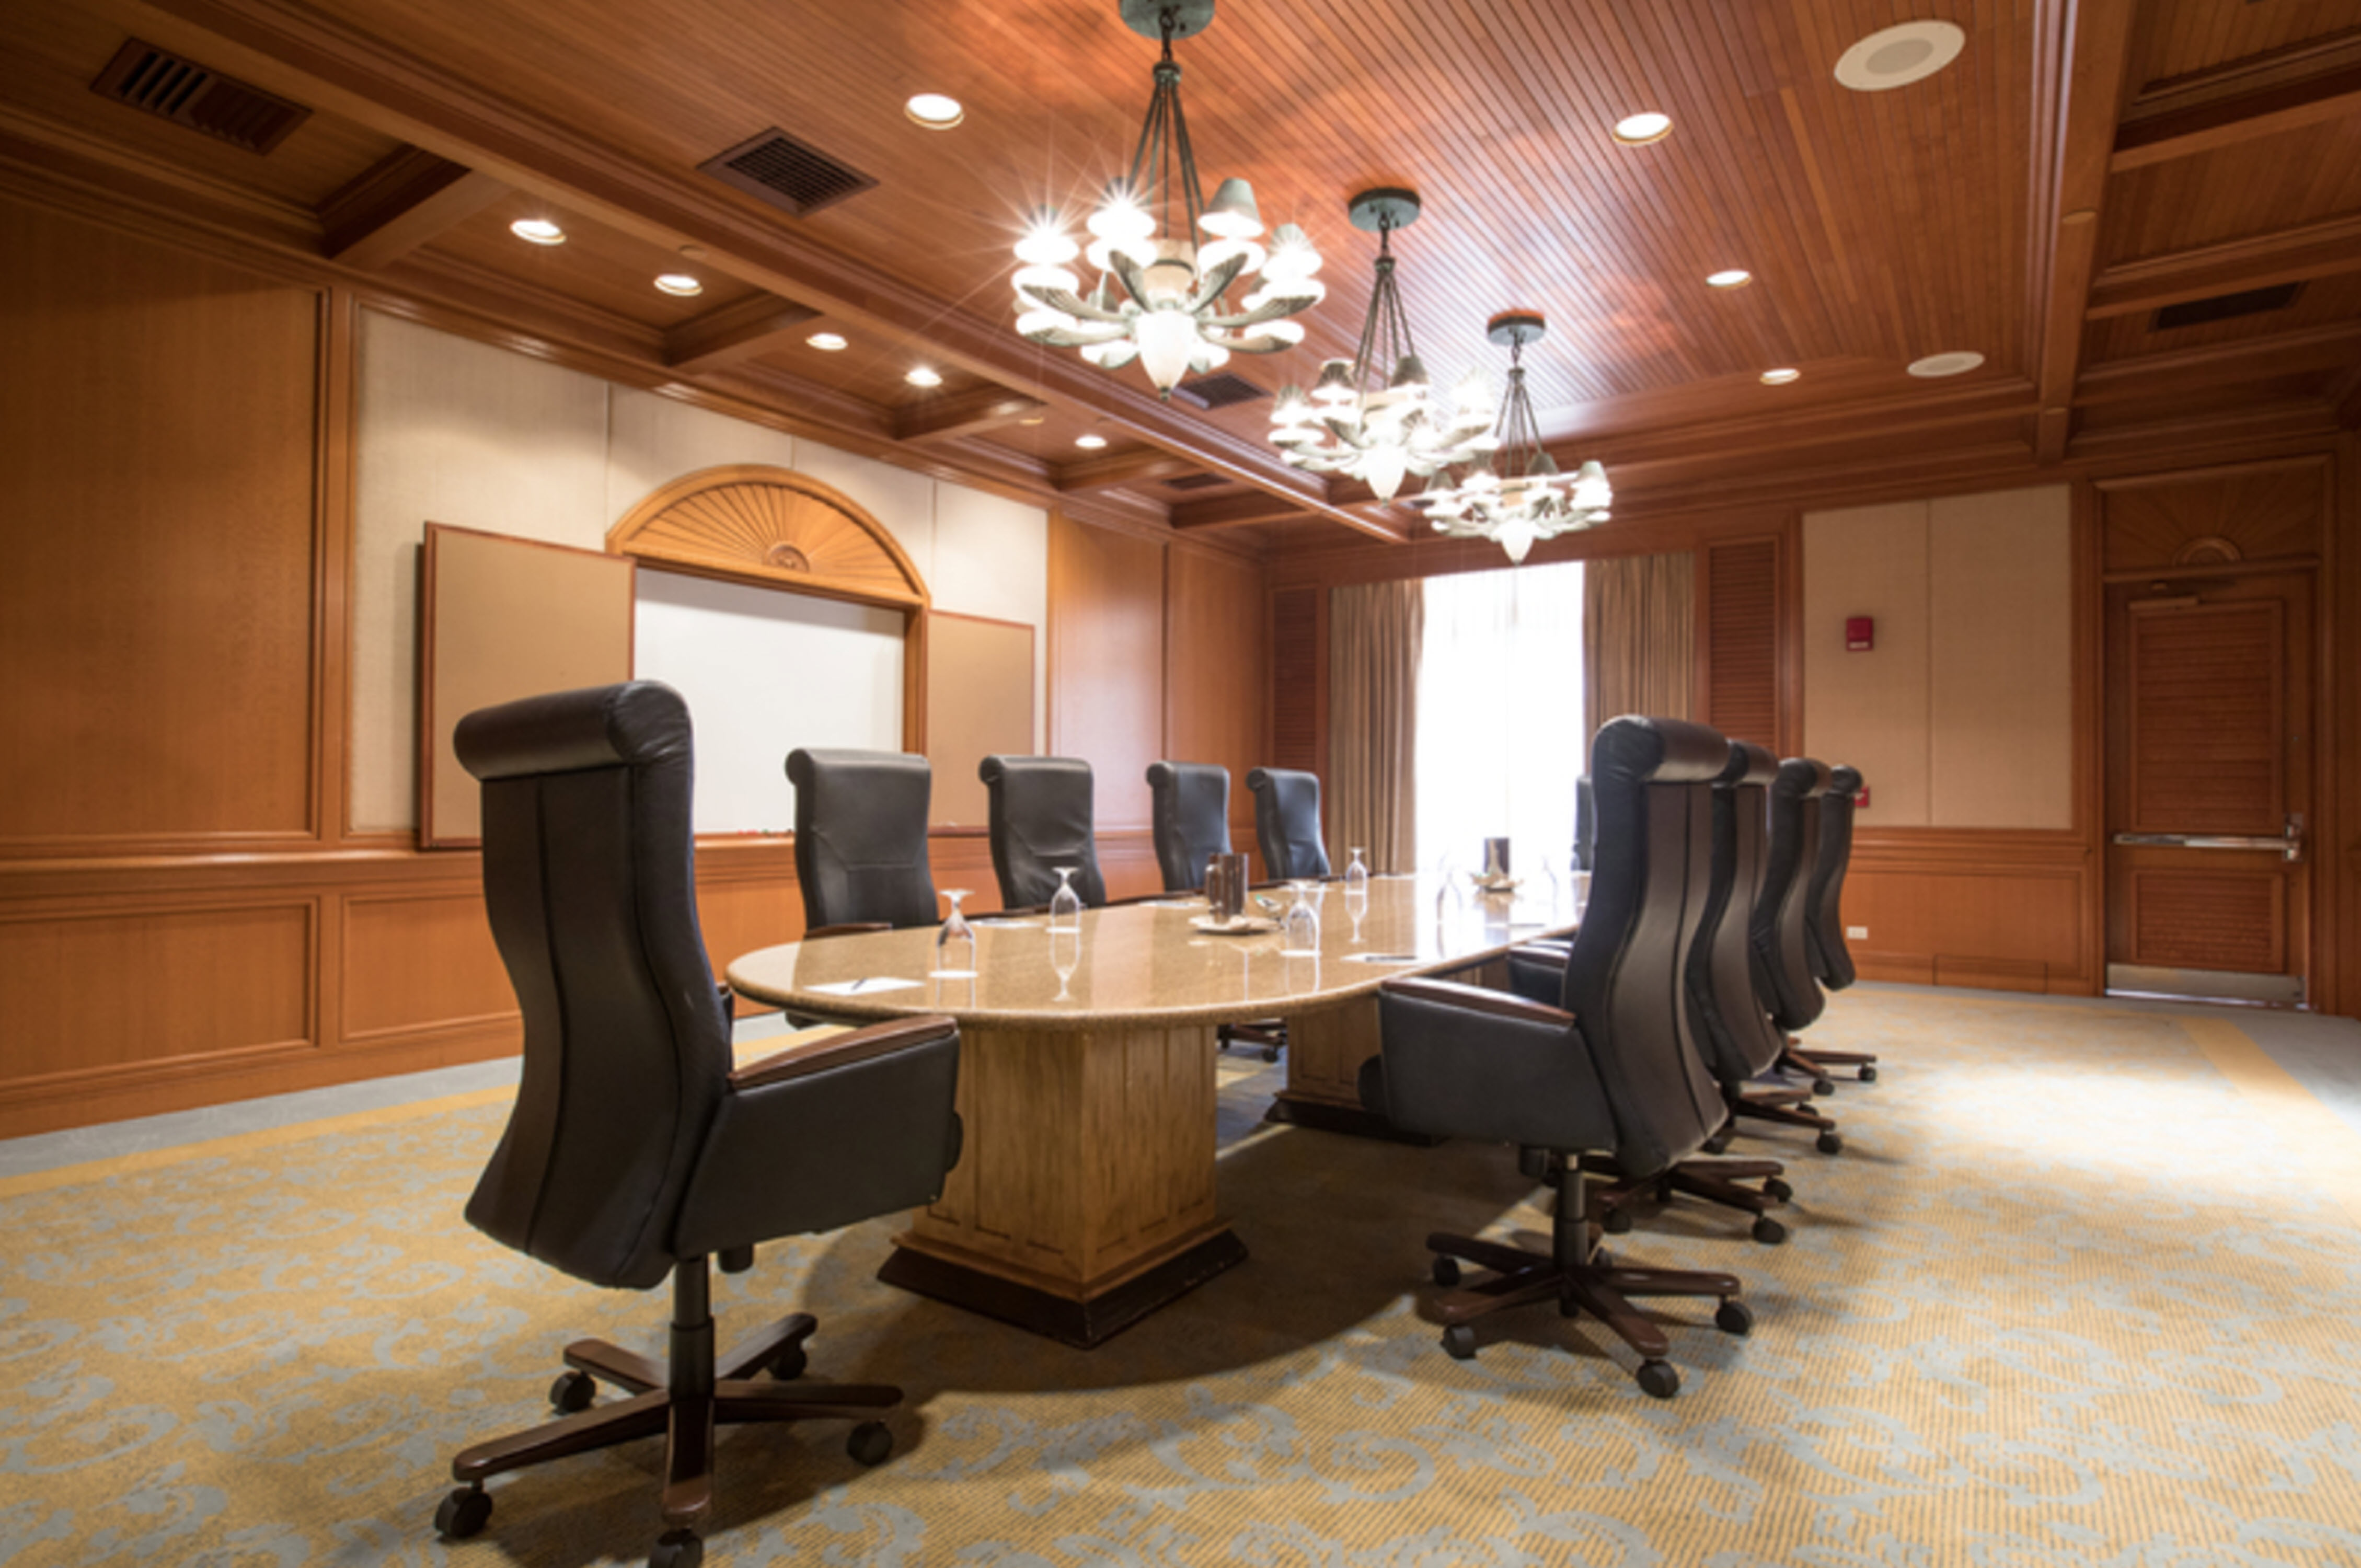 Boardroom with wood panelling